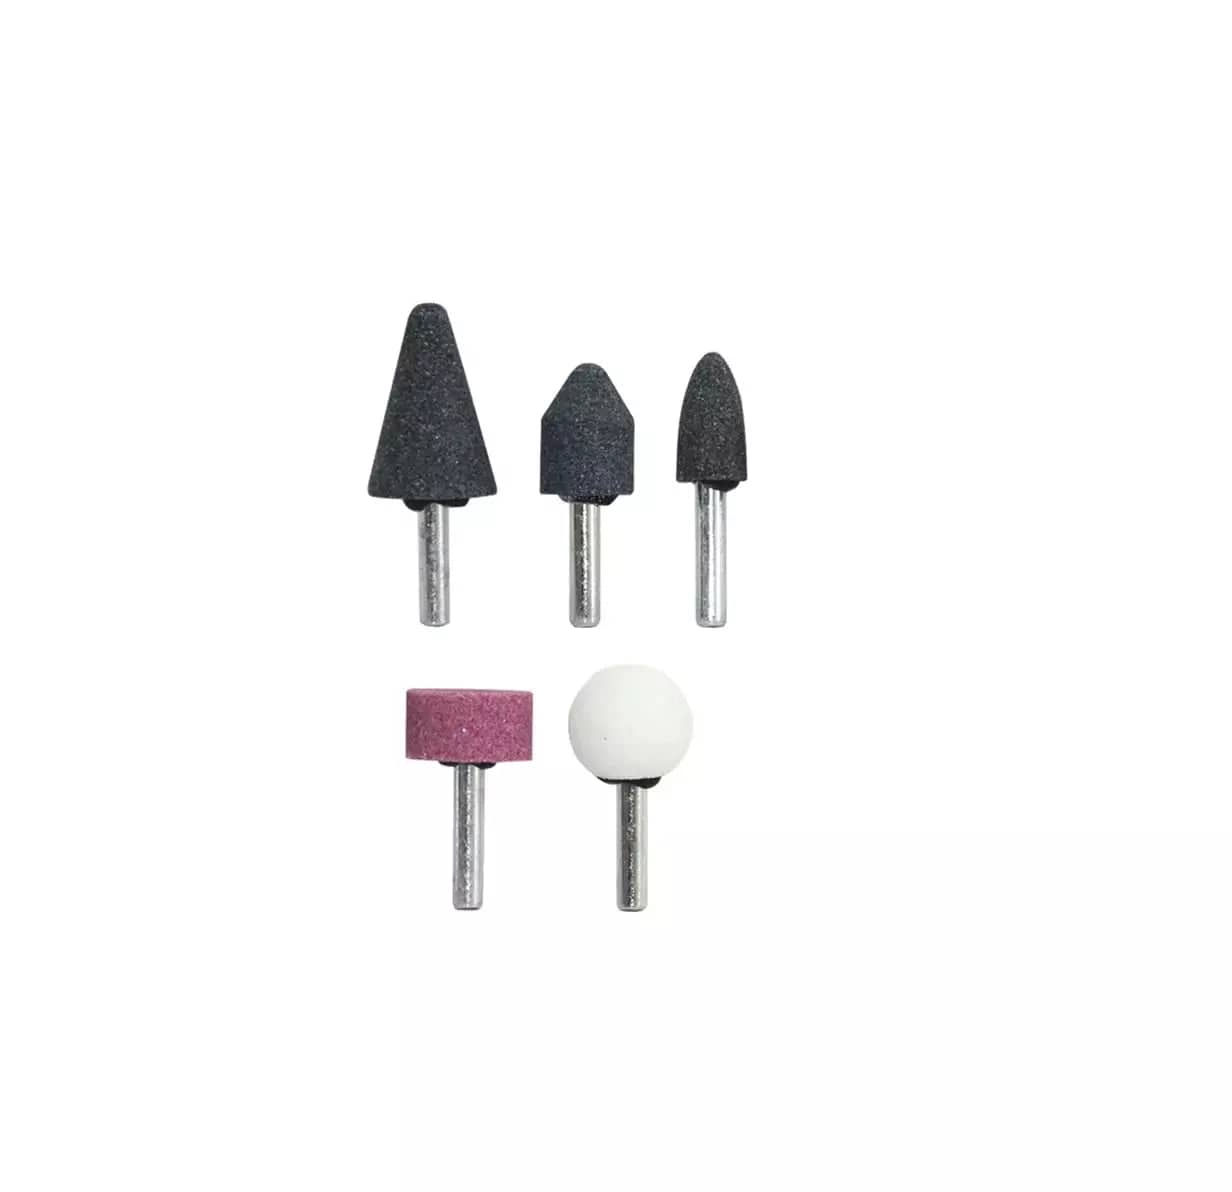 Ingco 5 Pieces Accessories for Die Grinder - AKB0501 | Supply Master | Accra, Ghana Oscillating Tool Accessories Buy Tools hardware Building materials